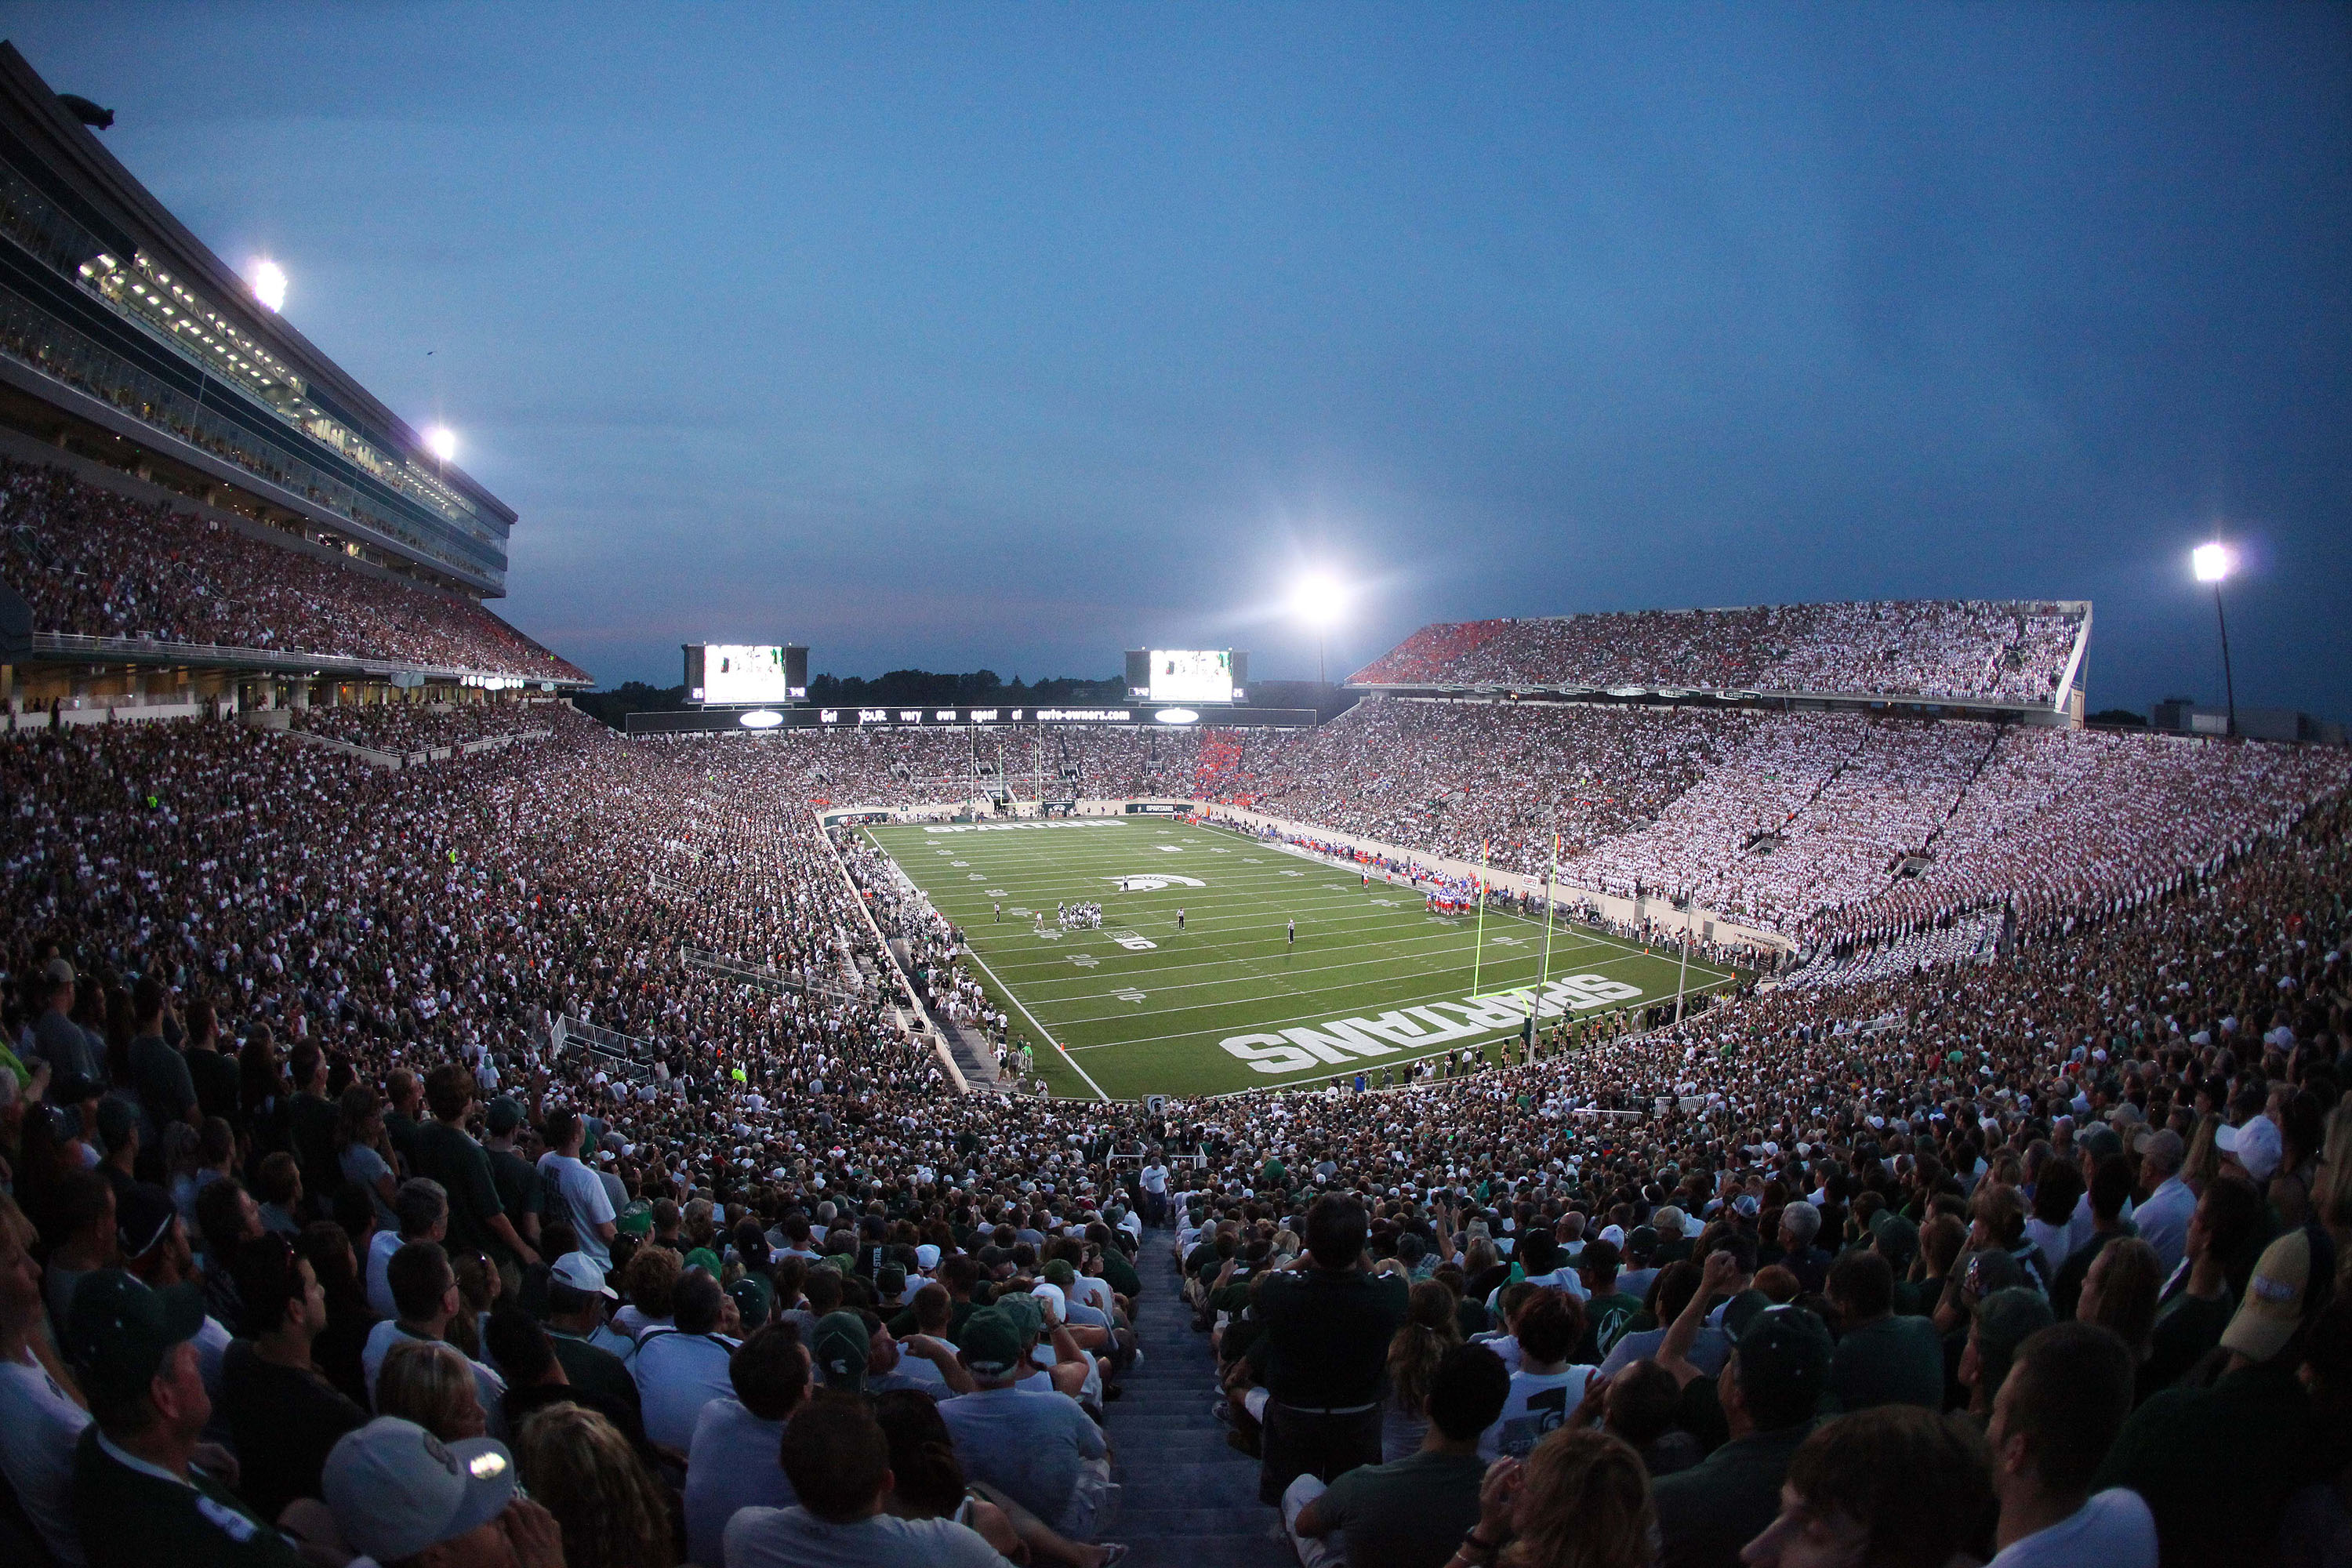 Spartans draw largest opening crowd since 1990 - Big Ten Network